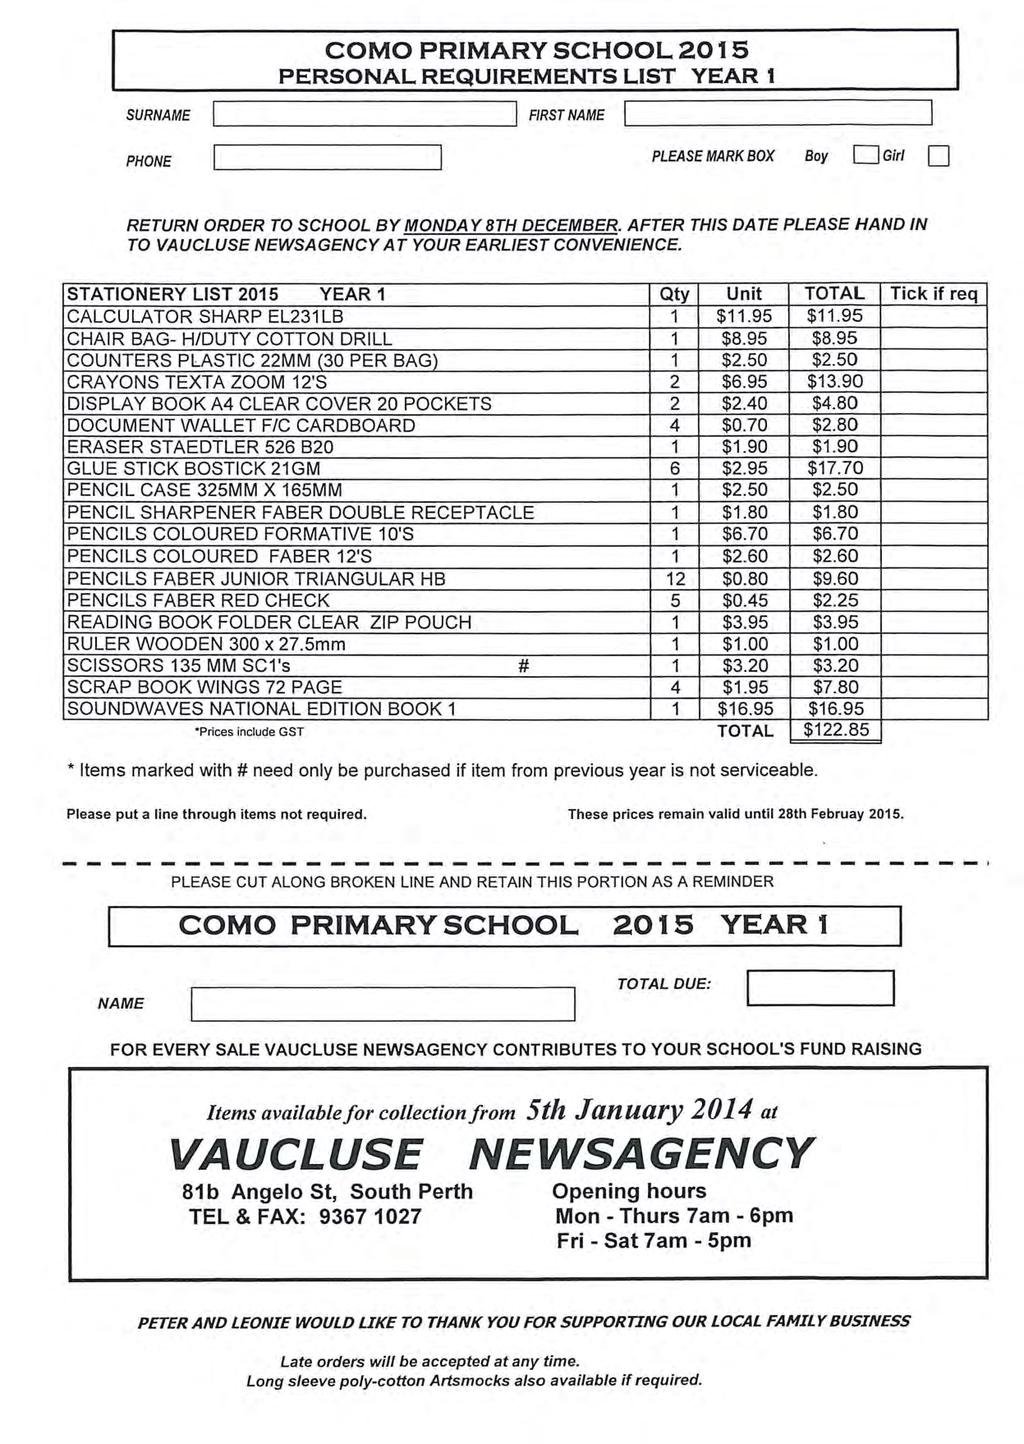 SUR COMO PRIMARY SCHOOL 2015 PERSONAL REQUIREMENTS LIST YEAR 1 ~--------------------~ FIRST PHONE PLEASE MARK BOX Boy D Girl D RETURN ORDER TO SCHOOL BY MONDAY 8TH DECEMBER.